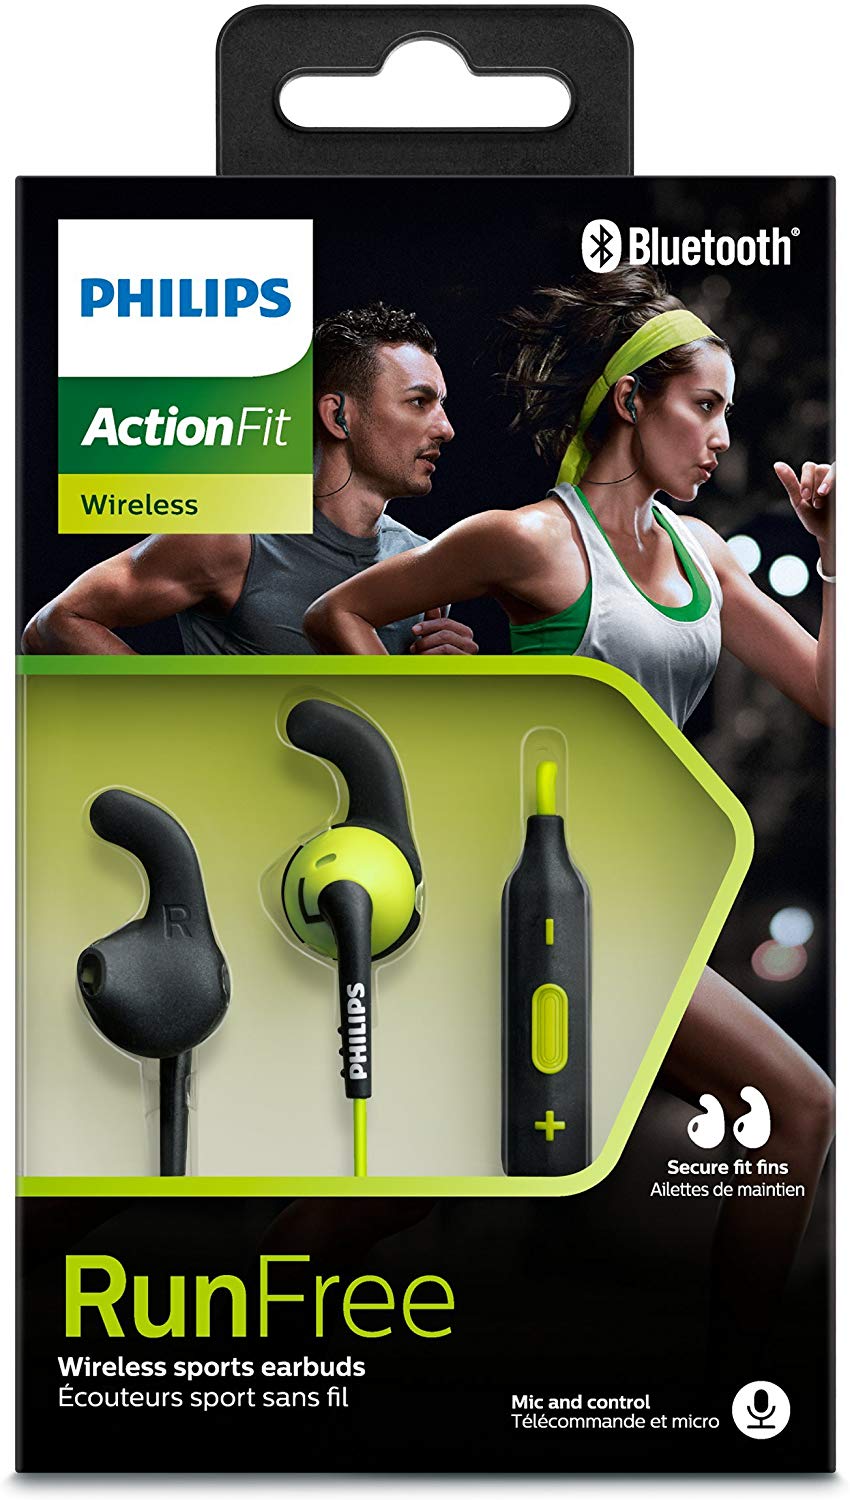 Fone Sport Sem Fio, Bluetooth Action Fit In Ear Resistente Ao Suor, Philips, SHQ6500Cl/00